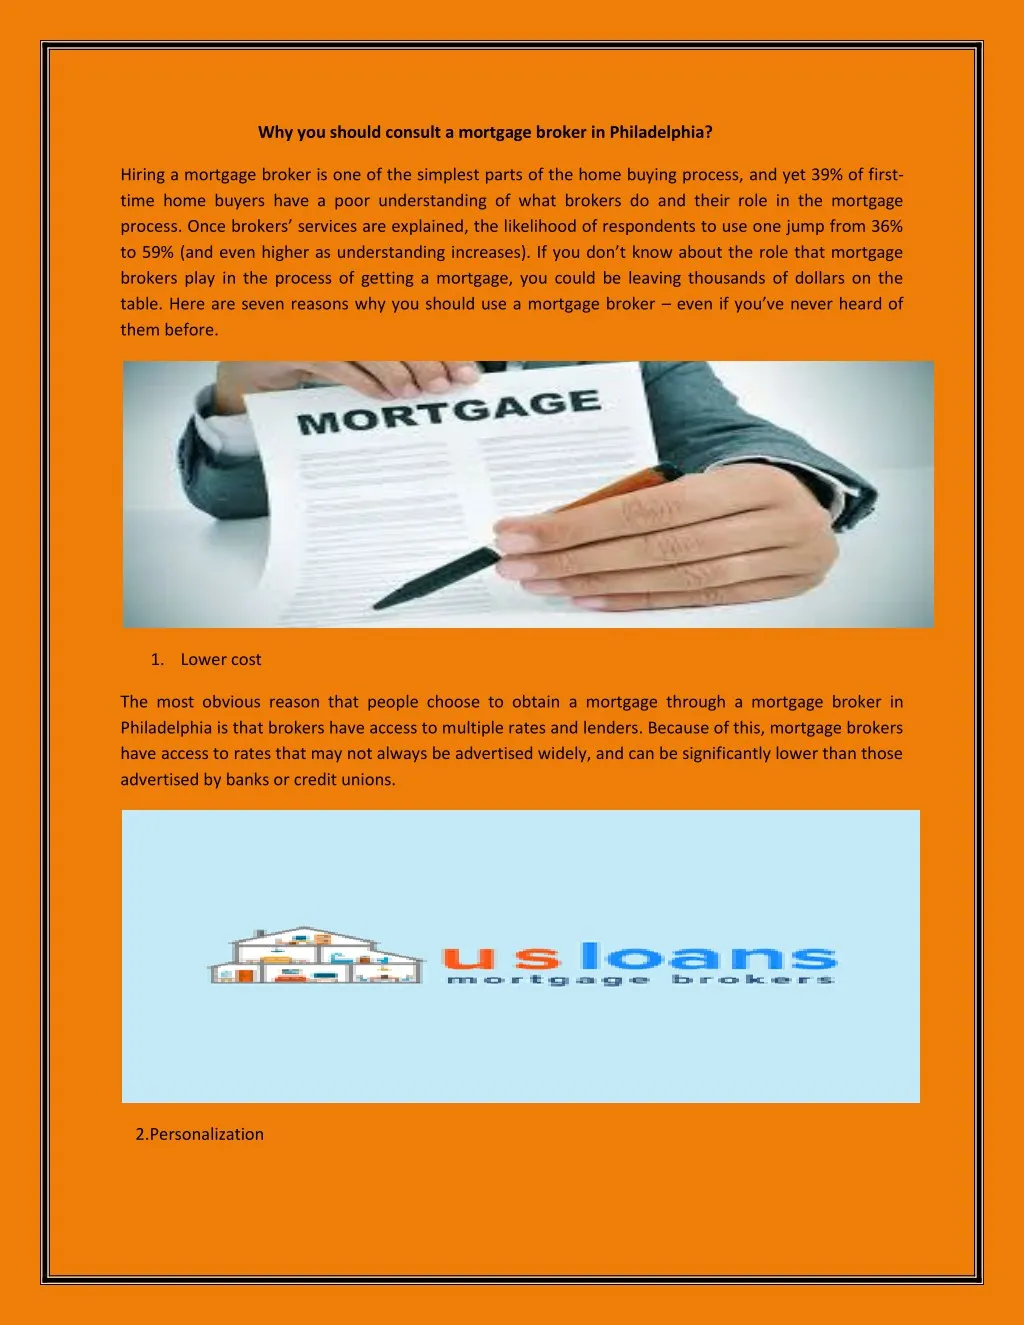 why you should consult a mortgage broker